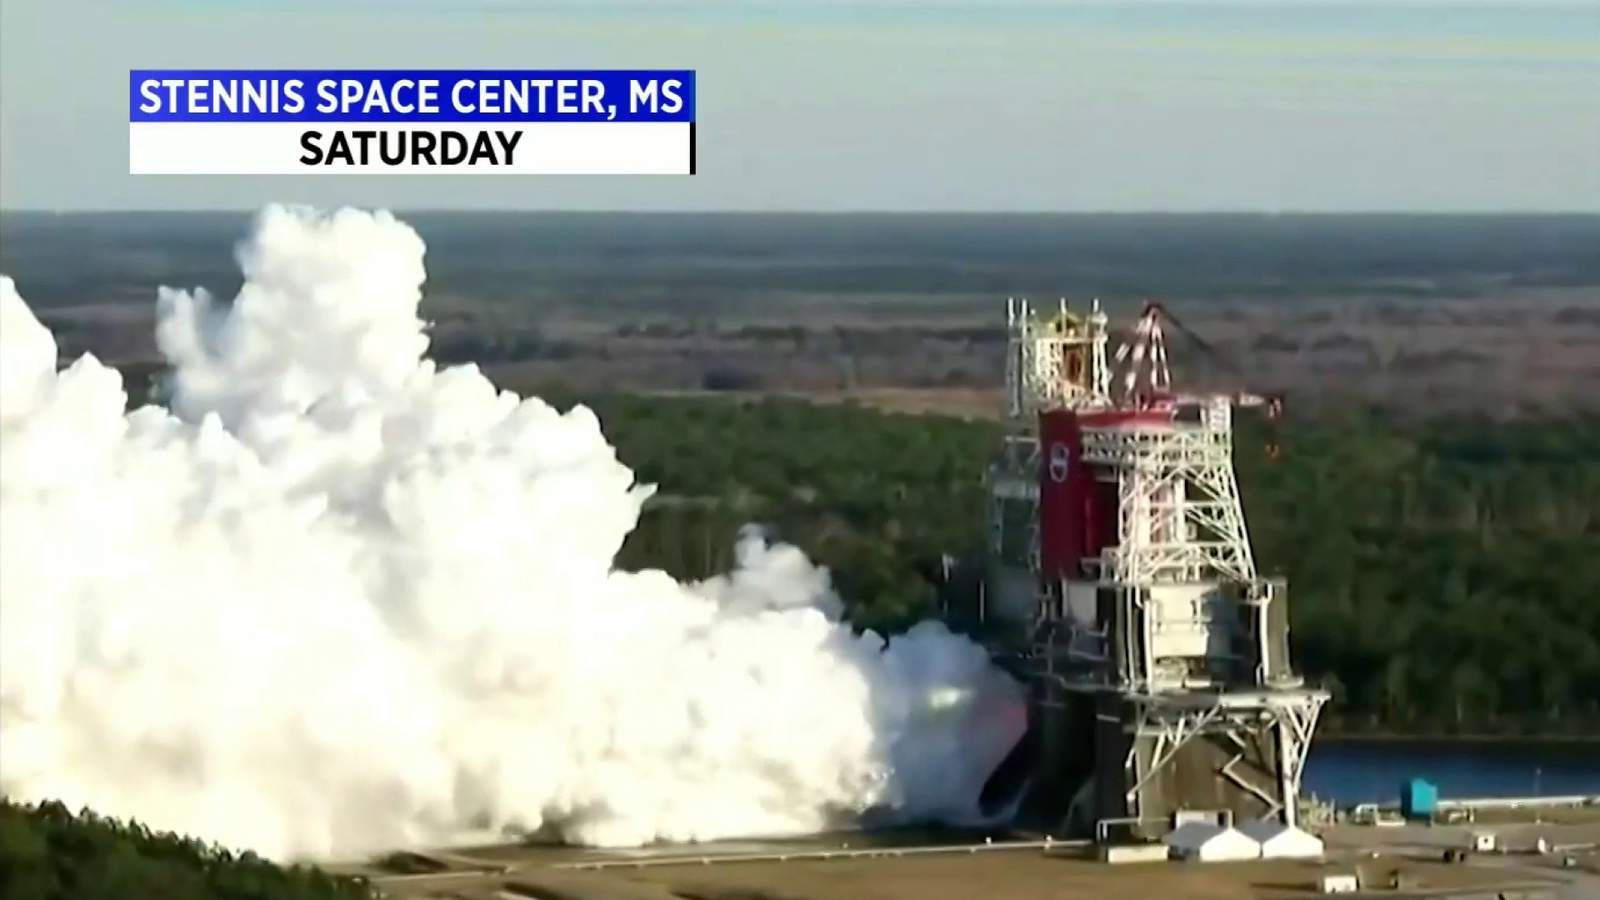 NASA test fires SLS rocket ahead of move to Florida, but engines shut down early